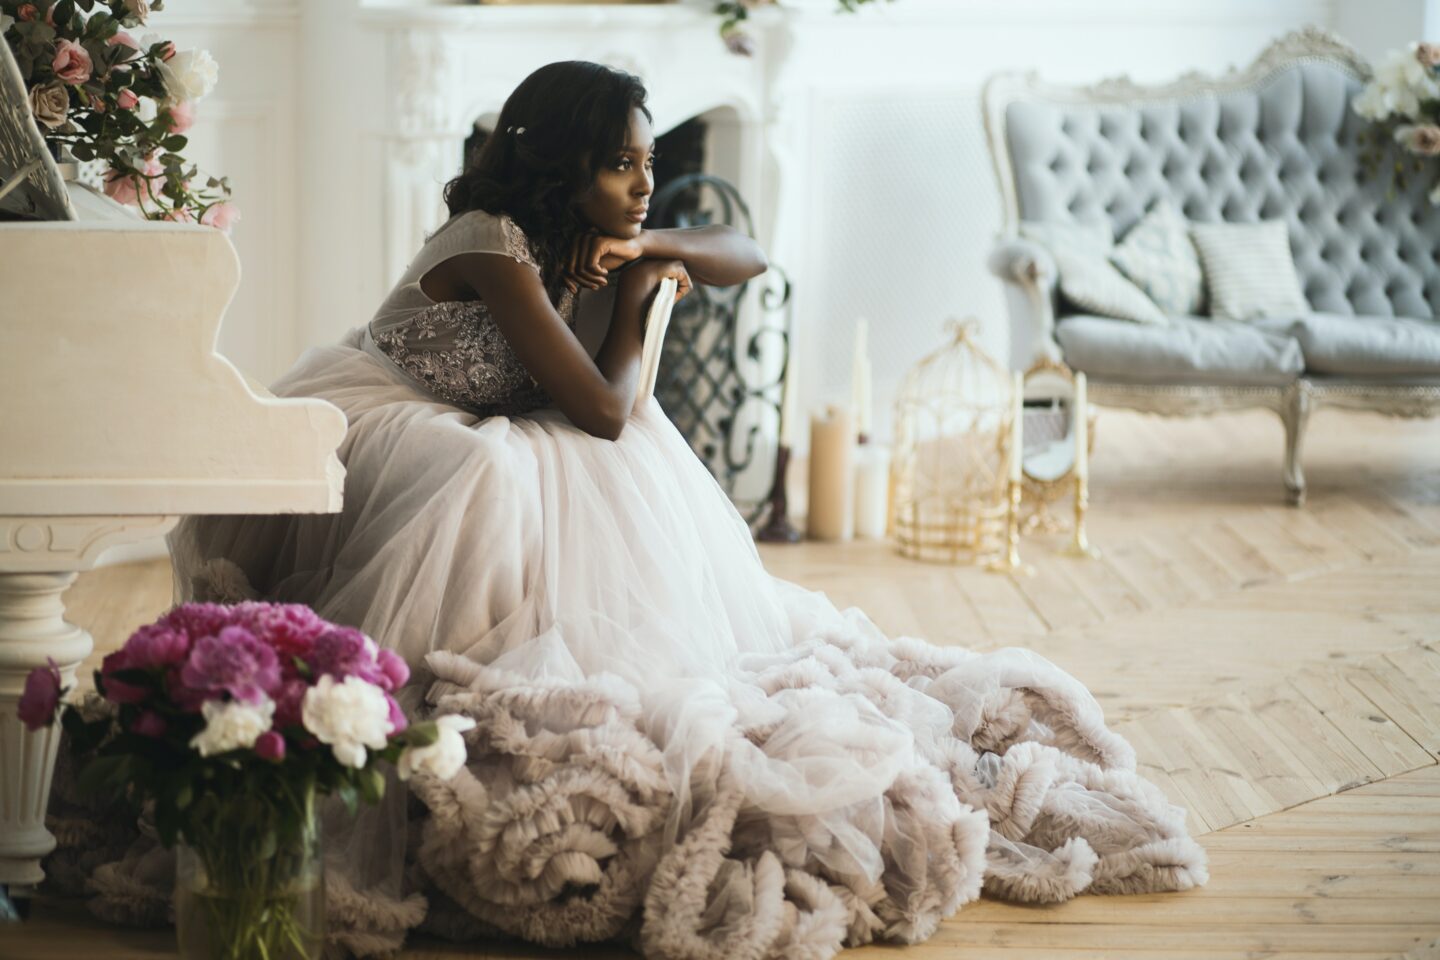 Fashion Tips That Every Bride Should Keep In Mind